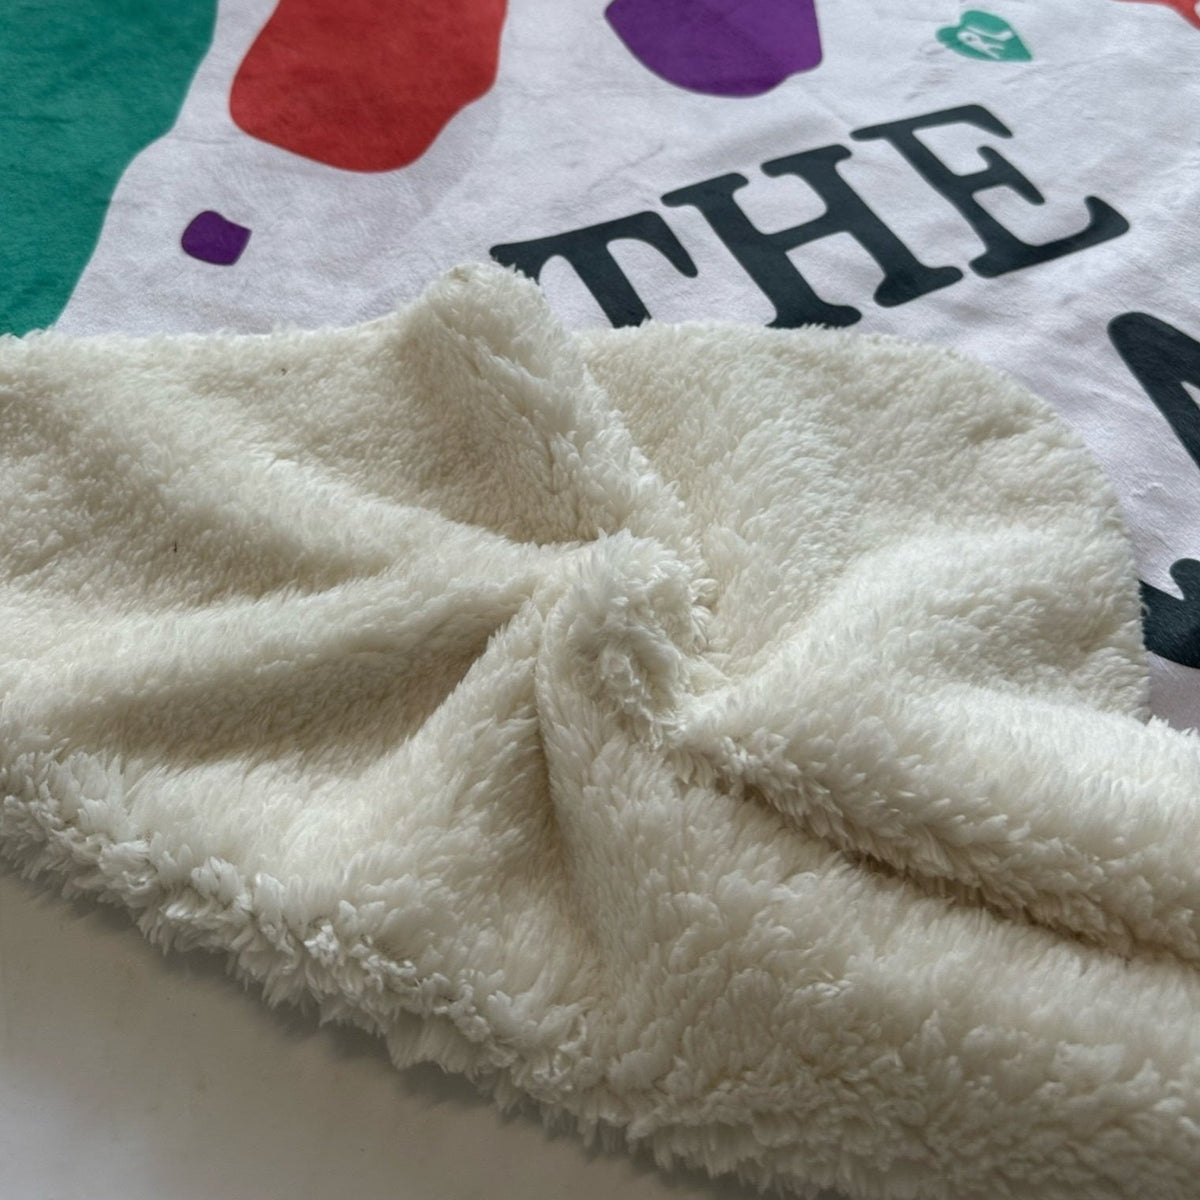 The Marathon Sherpa Blanket - RED LETTERS